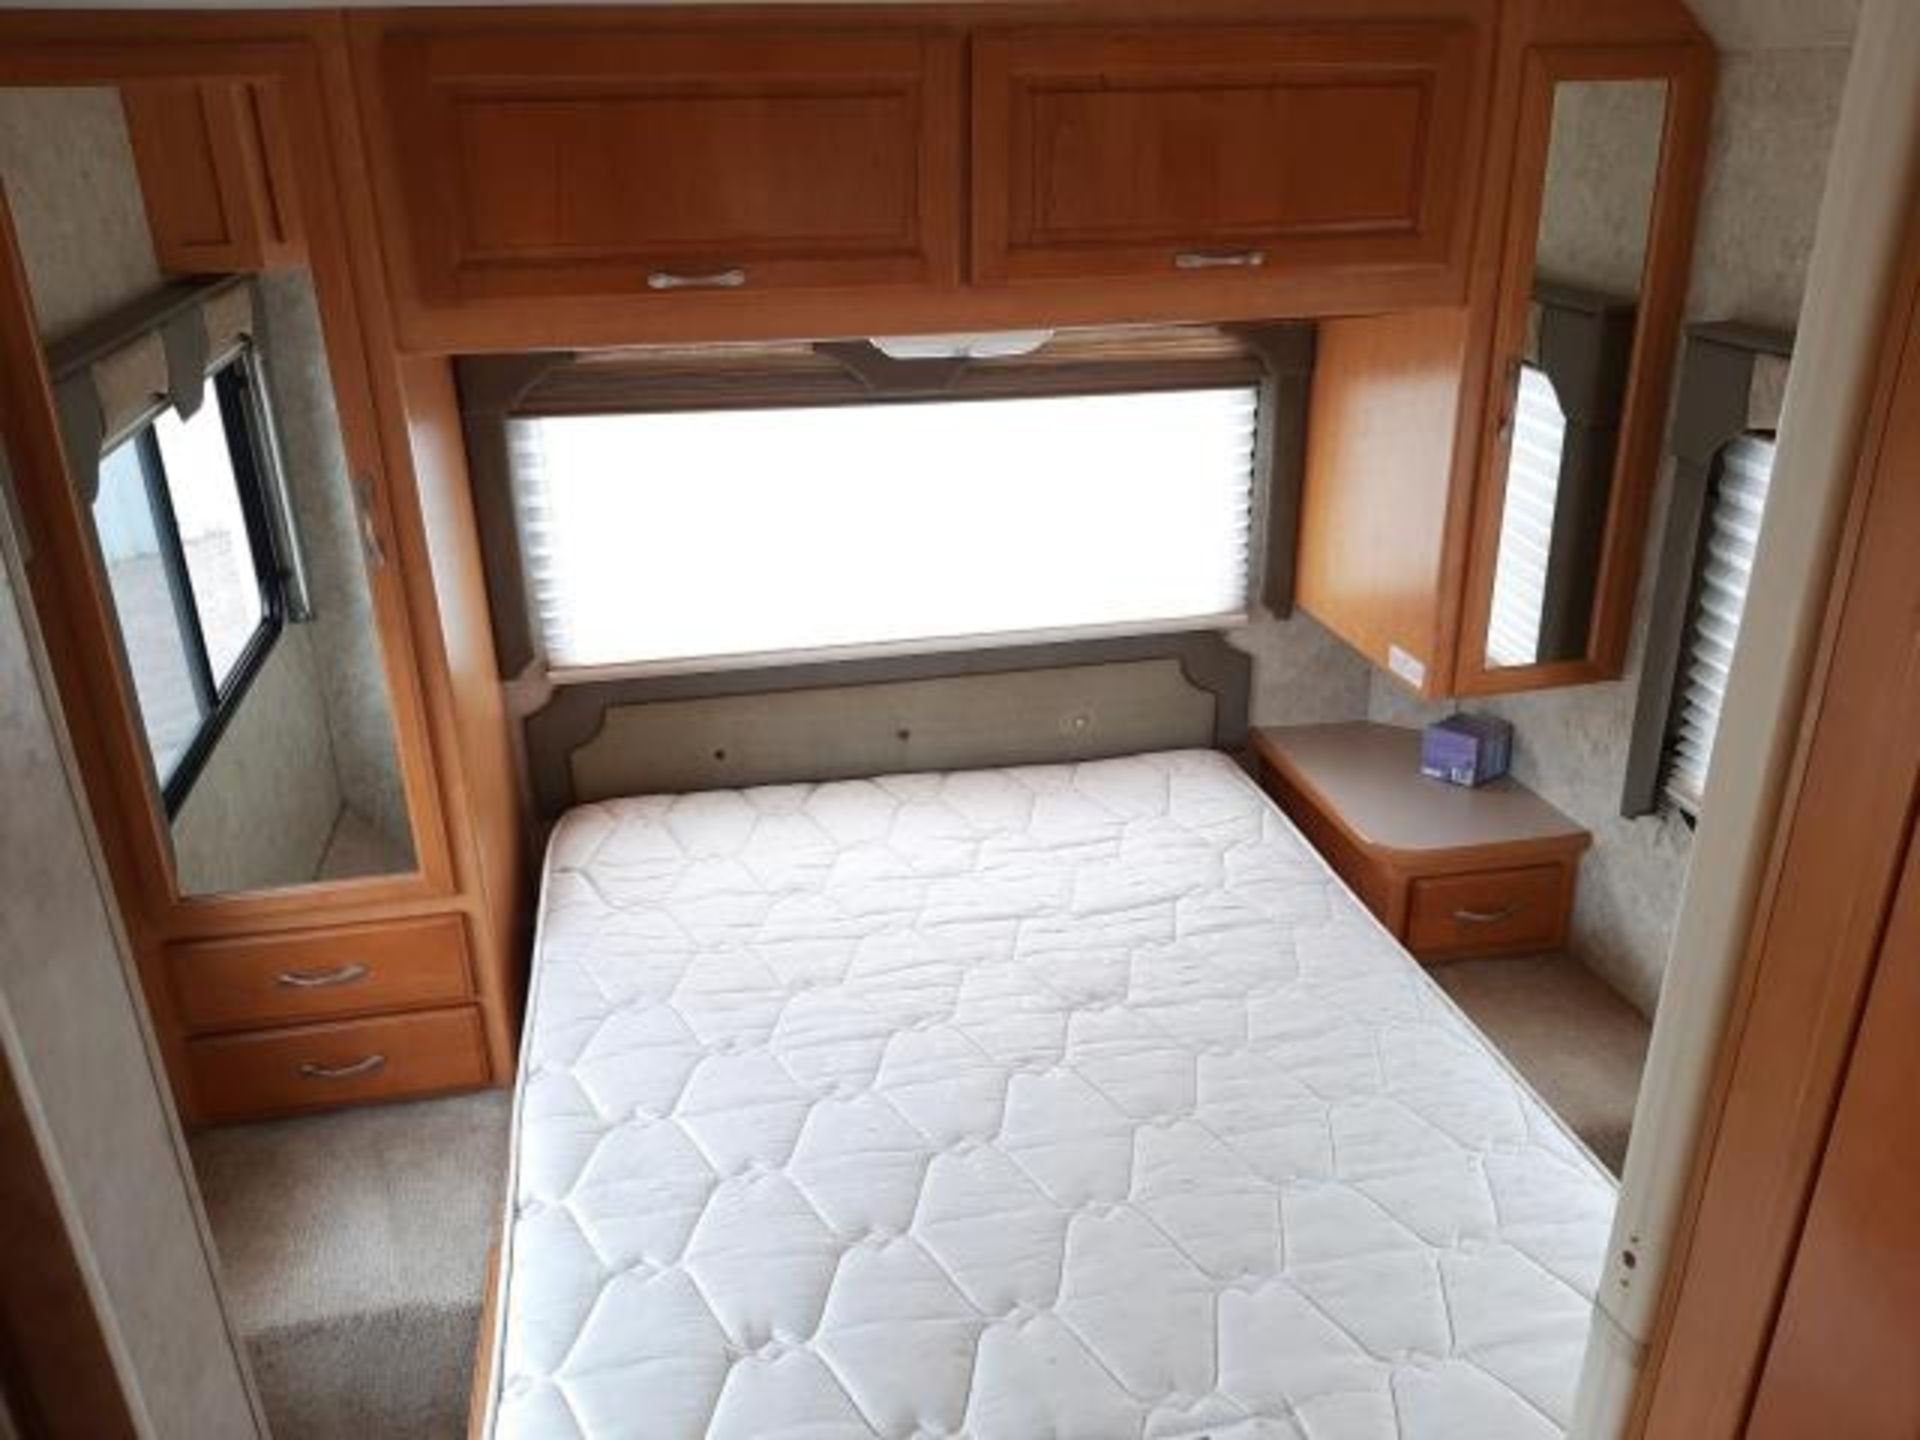 FORD E450 FOURWINDS RV 7 BERTH LHD MOTORHOME, VERY LOW MILEAGE 34,453 MILES *NO VAT* - Image 10 of 14